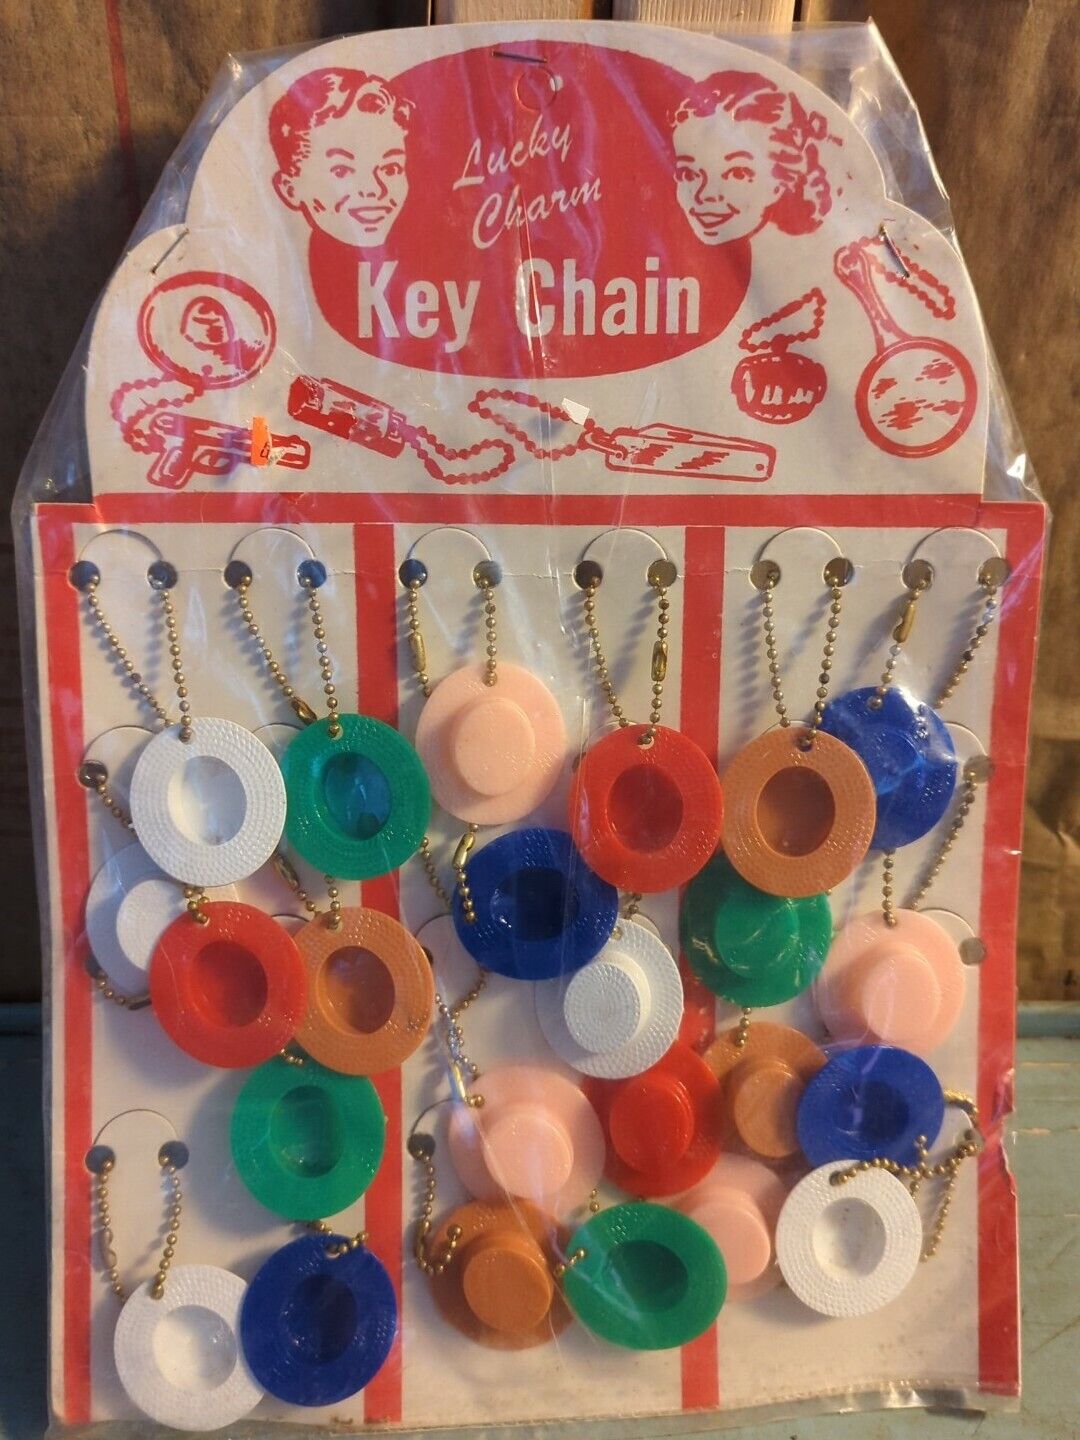 NOS 50s 60s Western Hats Vintage Lucky Charm Display Plastic 24 Keychains 